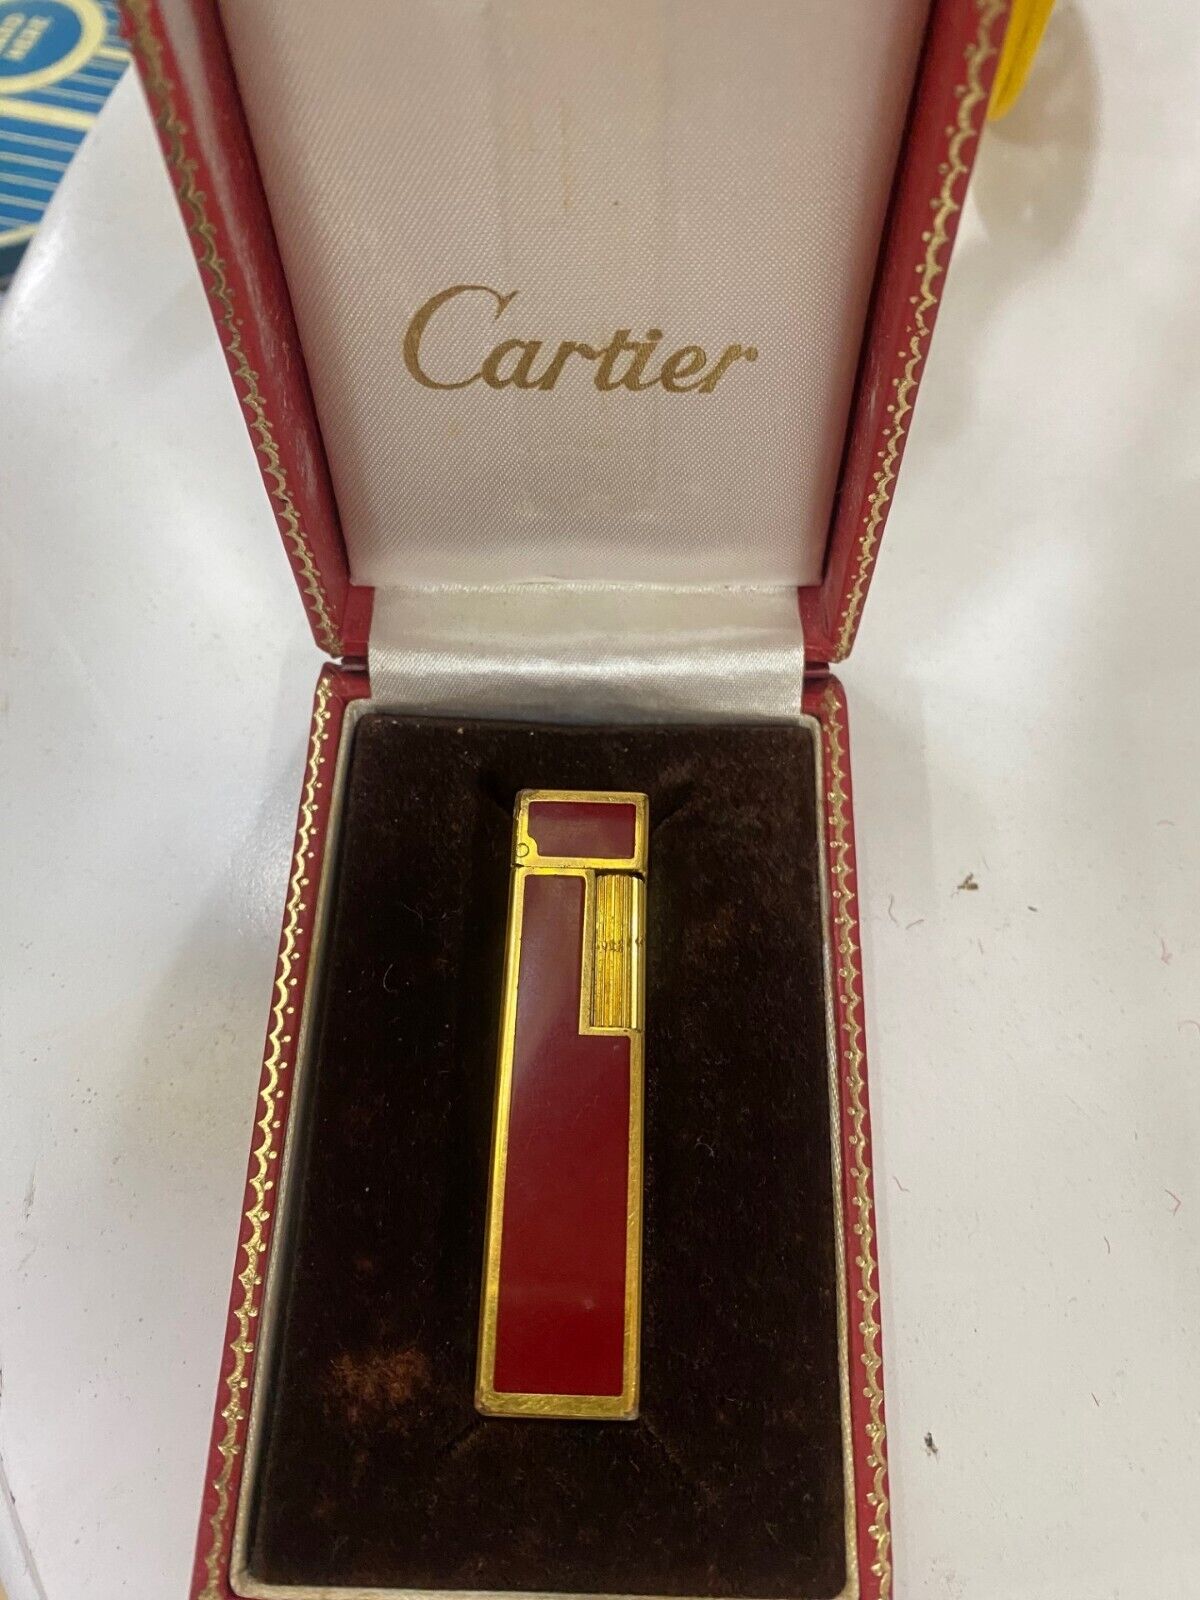 VINTAGE CARTIER CUBE LIGHTER, RED EARLY 1960S 18K WITH BOX ART DECO